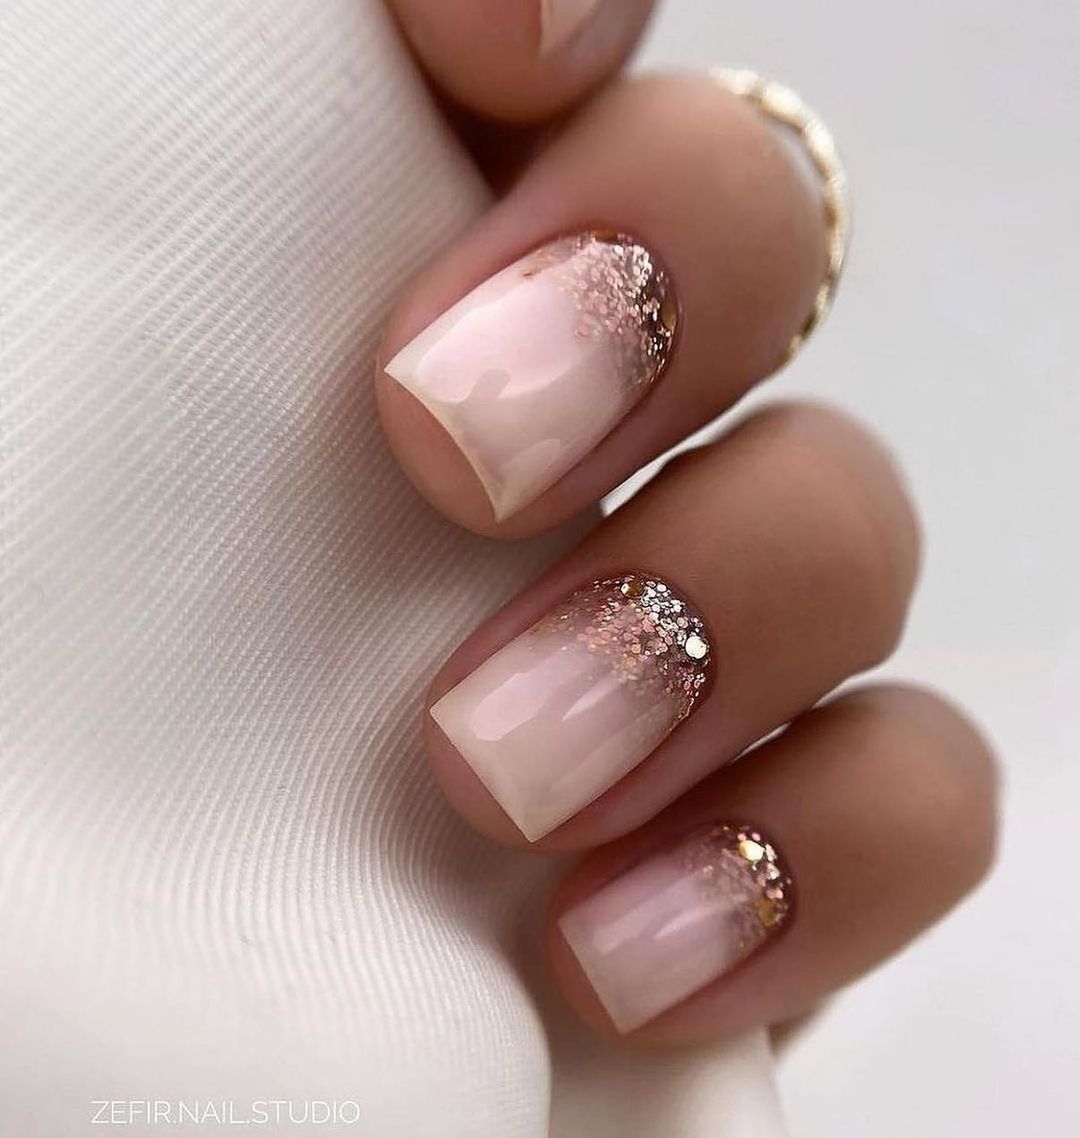 Buy Fdesigner Wedding Fake Nail Crystal Long Press on Nail Bride False Nail  Tips Full Cover Acrylic Nails Fashion Nail Art Accessories for Women and  Girls (Champagne) Online at Low Prices in